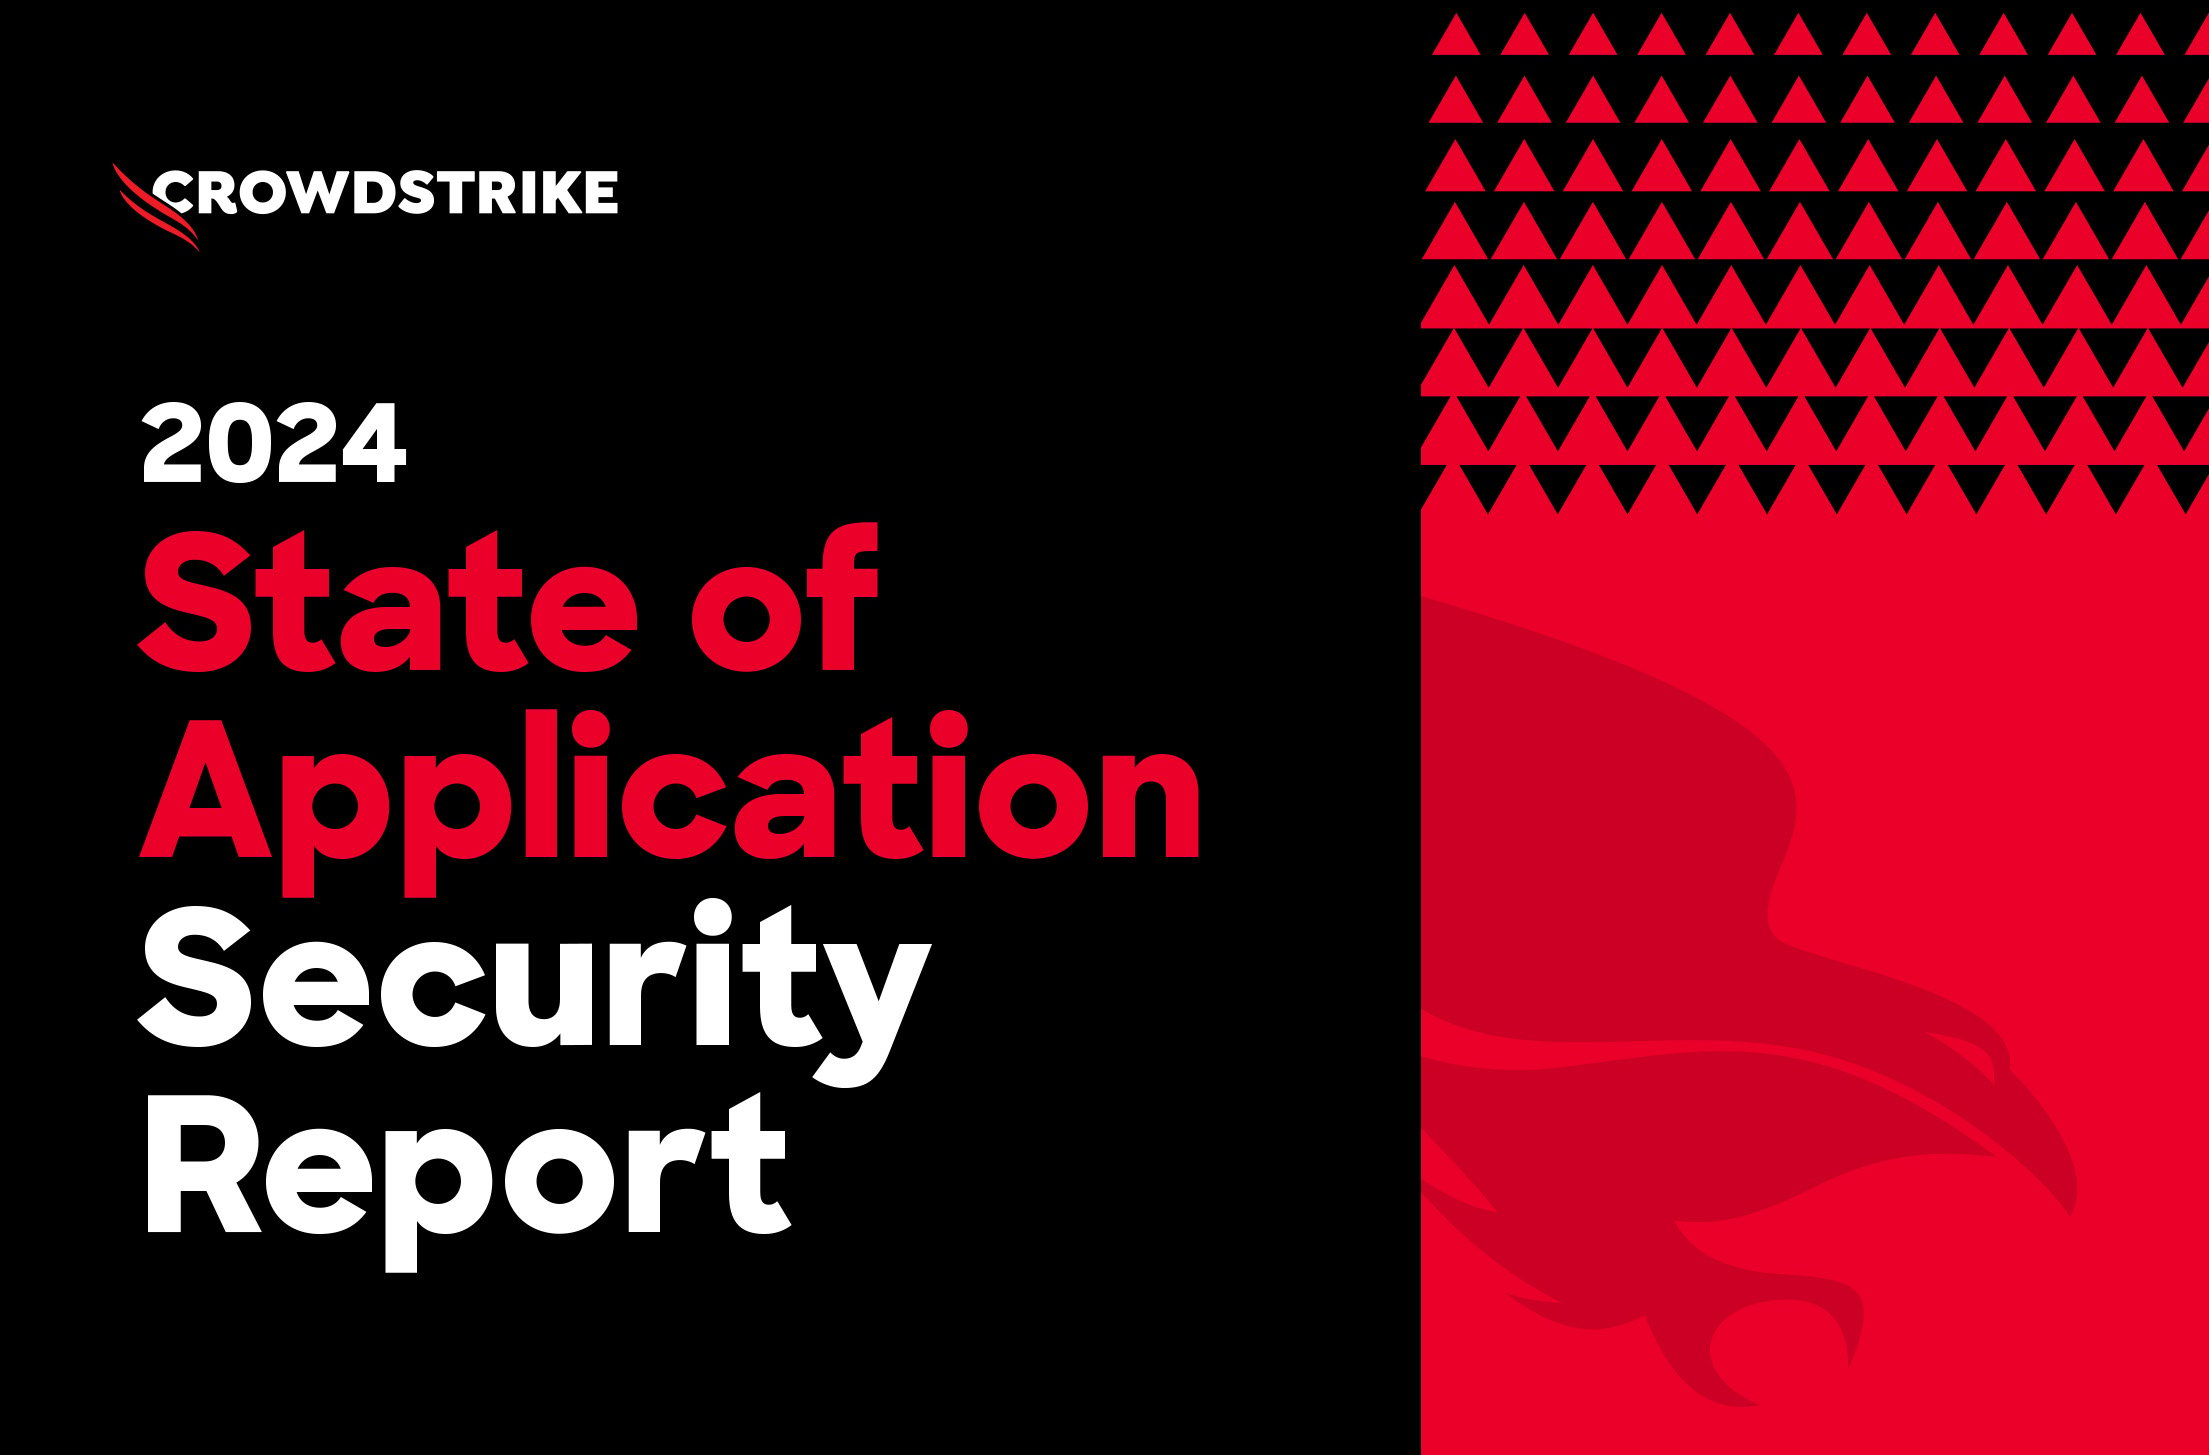 Key Findings from the CrowdStrike 2024 State of Application Security Report